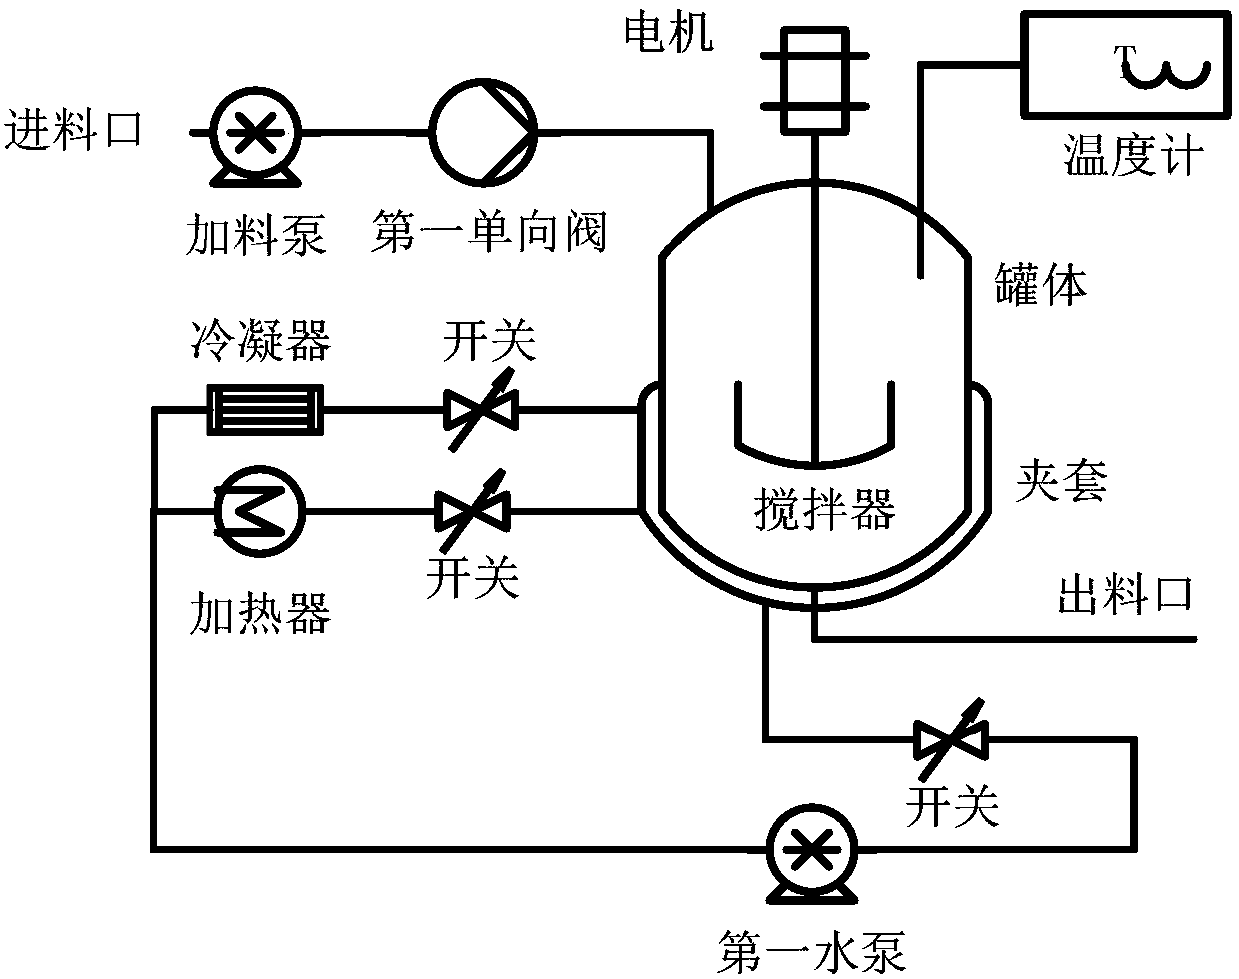 Chemical mechanical system using electromagnetically driven reactor